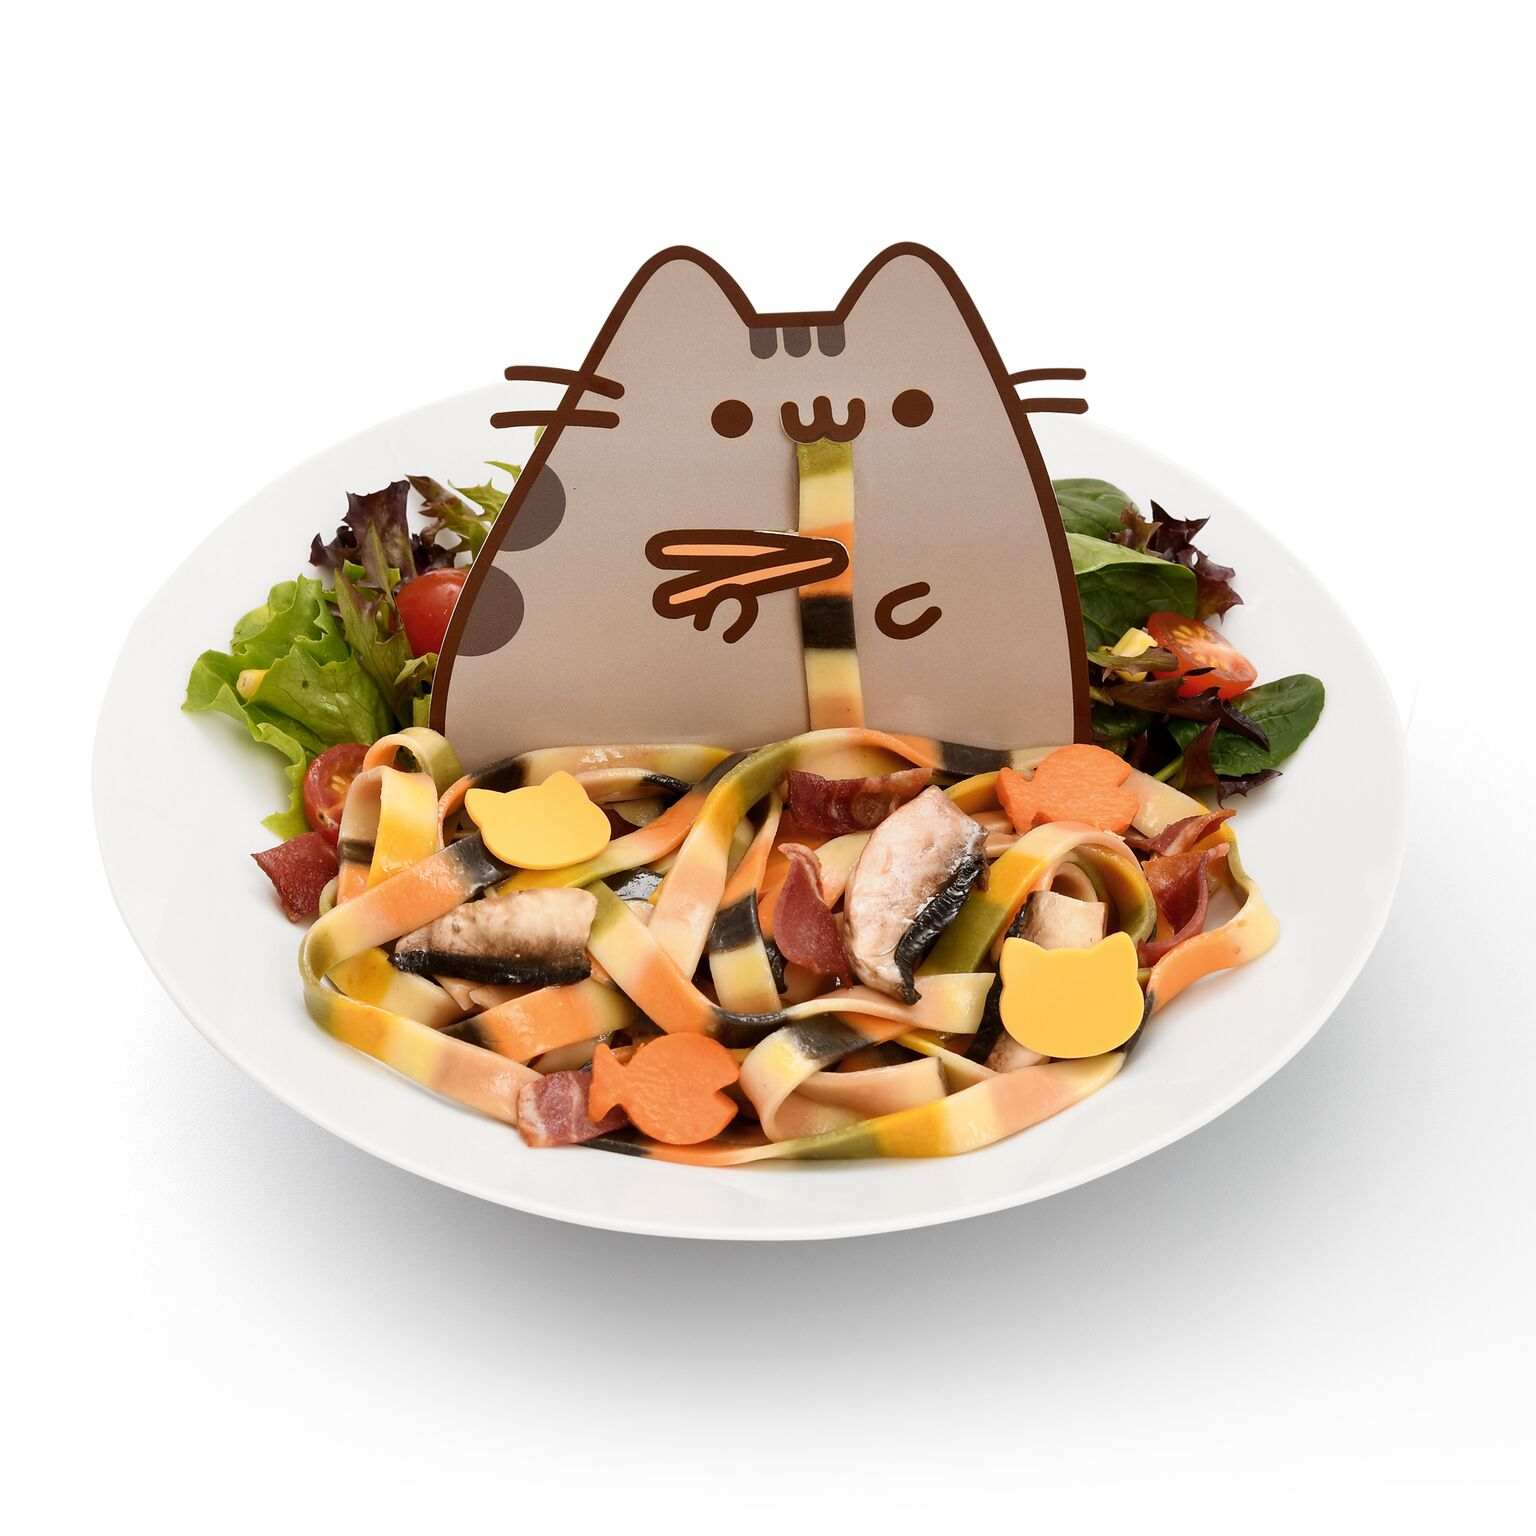 Internet Famous Pusheen  Cat  Takes Over Kumoya Cafe  From 6 